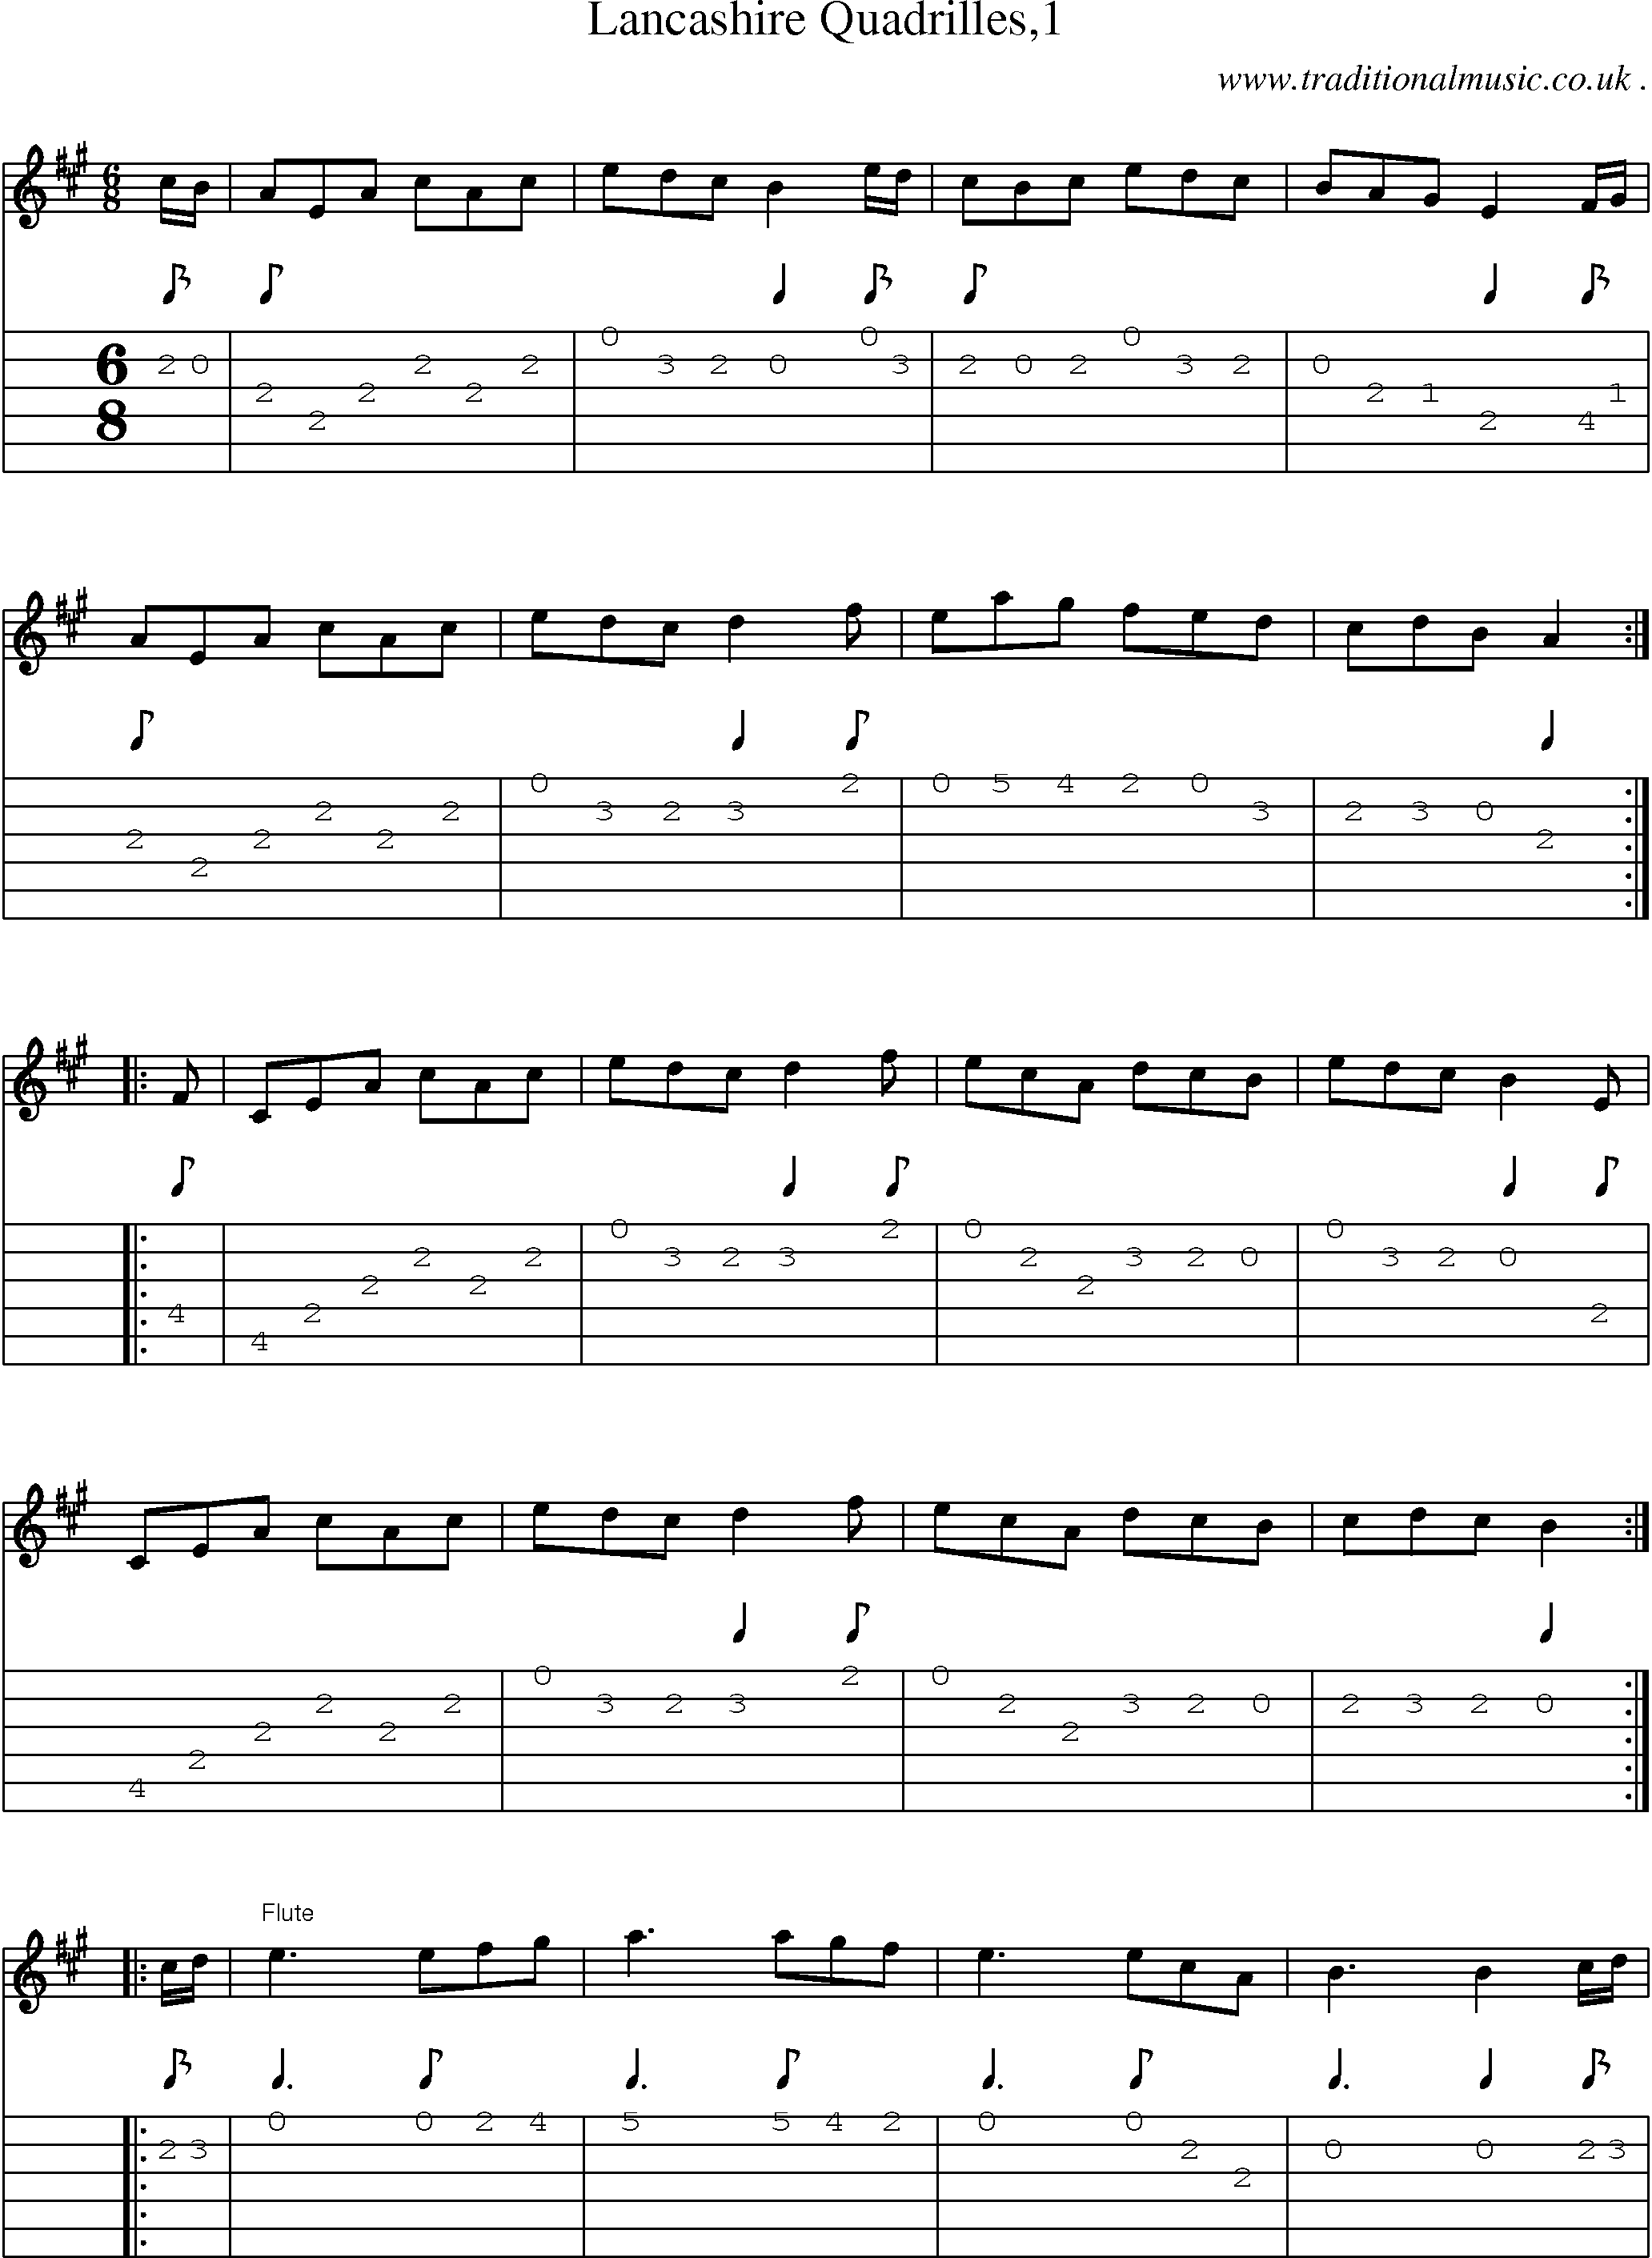 Sheet-Music and Guitar Tabs for Lancashire Quadrilles1